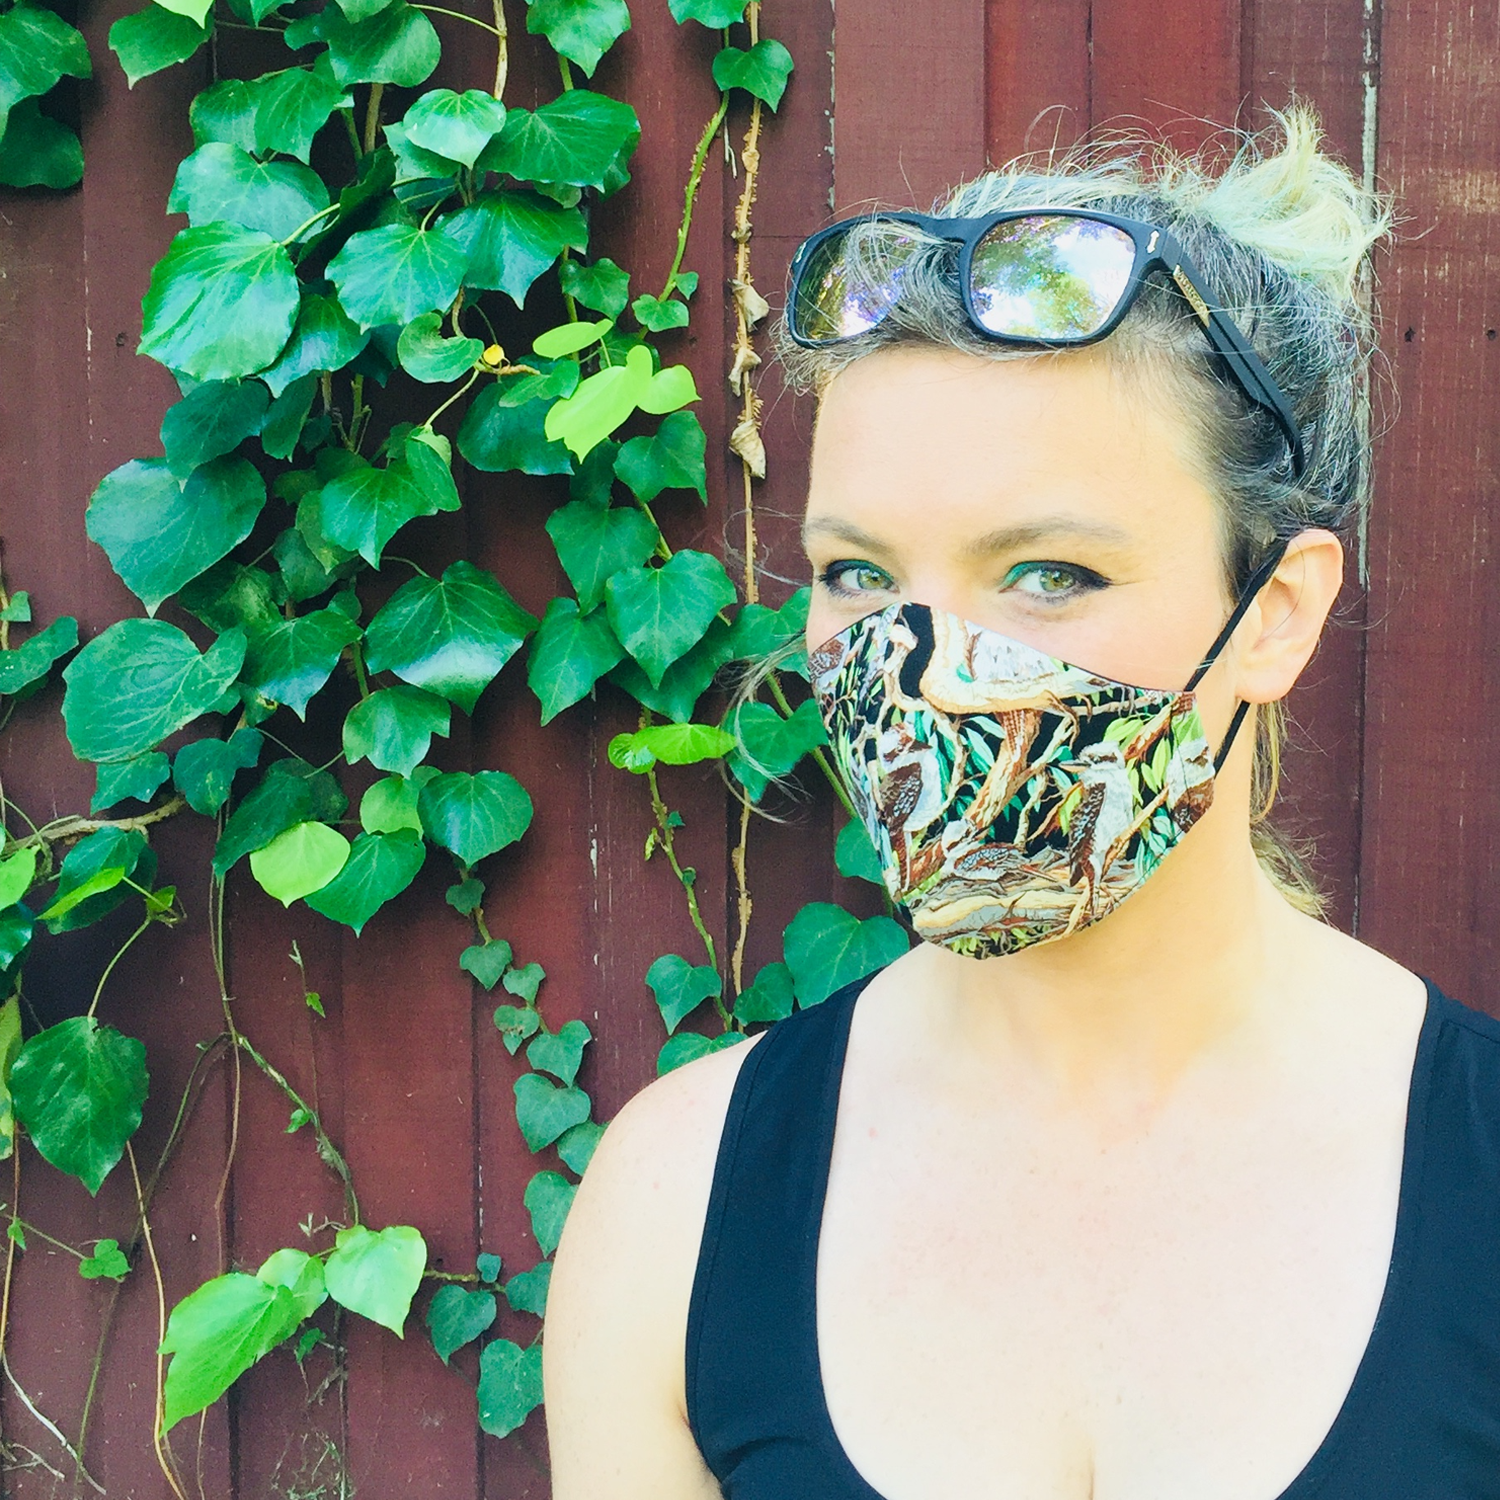 Triple layered face mask made in Melbourne Australia from cotton and poplin featuring a unique kookaburra print